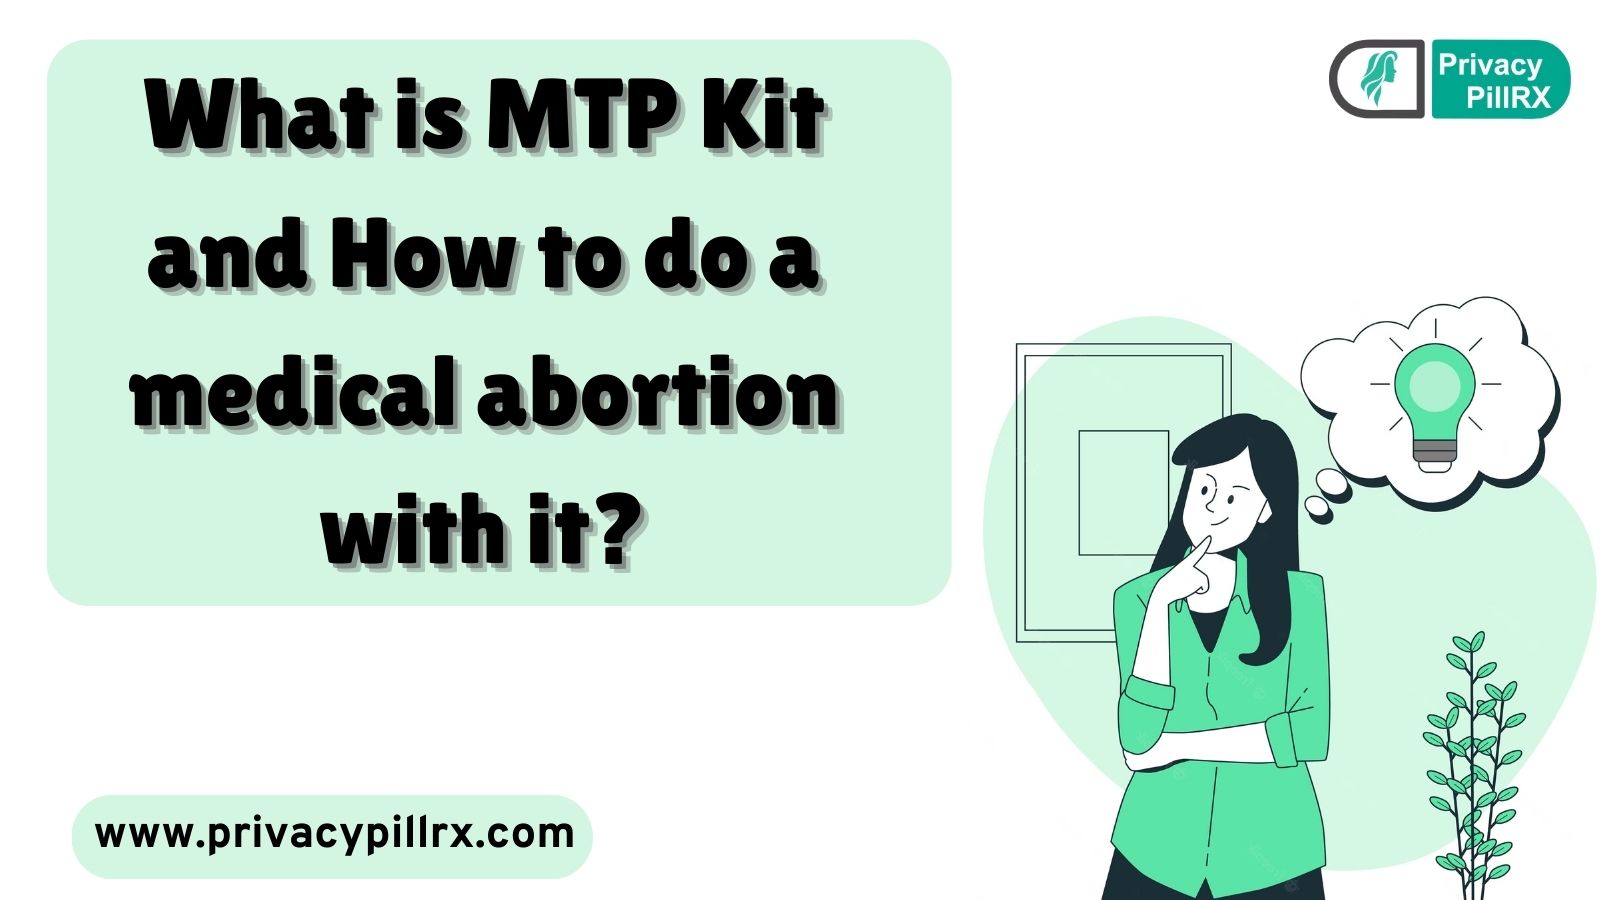 What is MTP Kit and How to do a medical abortion with it? - photo